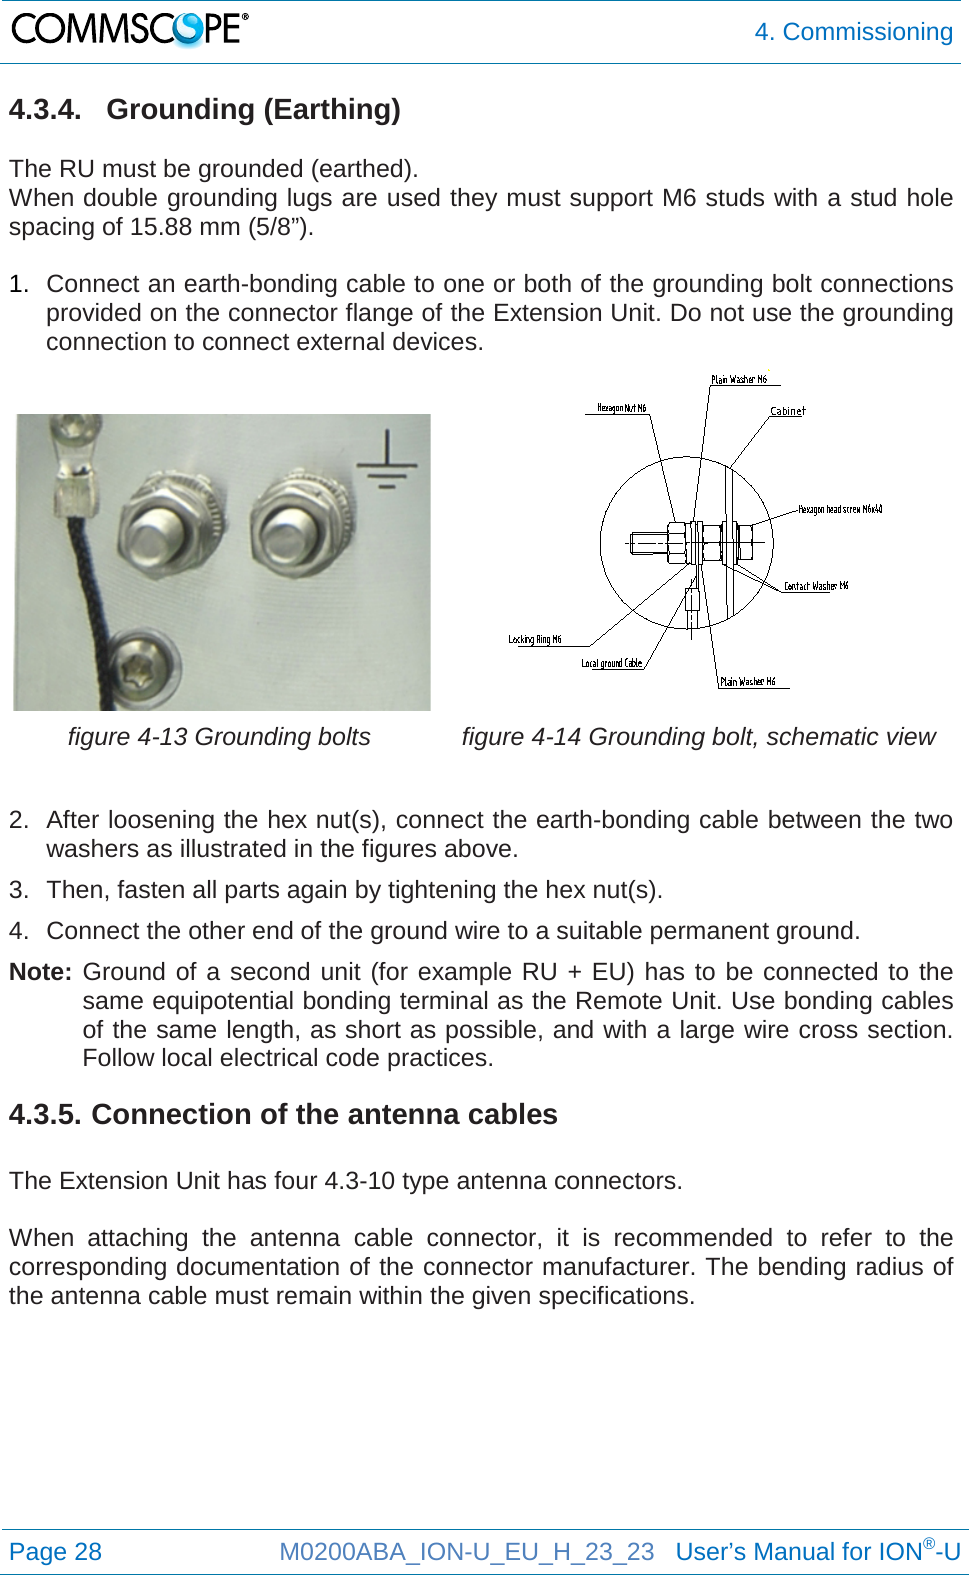  4. Commissioning  Page 28 M0200ABA_ION-U_EU_H_23_23   User’s Manual for ION®-U  4.3.4. Grounding (Earthing)  The RU must be grounded (earthed). When double grounding lugs are used they must support M6 studs with a stud hole spacing of 15.88 mm (5/8”).  1. Connect an earth-bonding cable to one or both of the grounding bolt connections provided on the connector flange of the Extension Unit. Do not use the grounding connection to connect external devices.   figure 4-13 Grounding bolts  figure 4-14 Grounding bolt, schematic view  2. After loosening the hex nut(s), connect the earth-bonding cable between the two washers as illustrated in the figures above. 3. Then, fasten all parts again by tightening the hex nut(s). 4. Connect the other end of the ground wire to a suitable permanent ground. Note: Ground of a second unit (for example RU + EU) has to be connected to the same equipotential bonding terminal as the Remote Unit. Use bonding cables of the same length, as short as possible, and with a large wire cross section. Follow local electrical code practices. 4.3.5. Connection of the antenna cables  The Extension Unit has four 4.3-10 type antenna connectors.  When attaching the antenna cable connector, it is recommended to refer to the corresponding documentation of the connector manufacturer. The bending radius of the antenna cable must remain within the given specifications.     